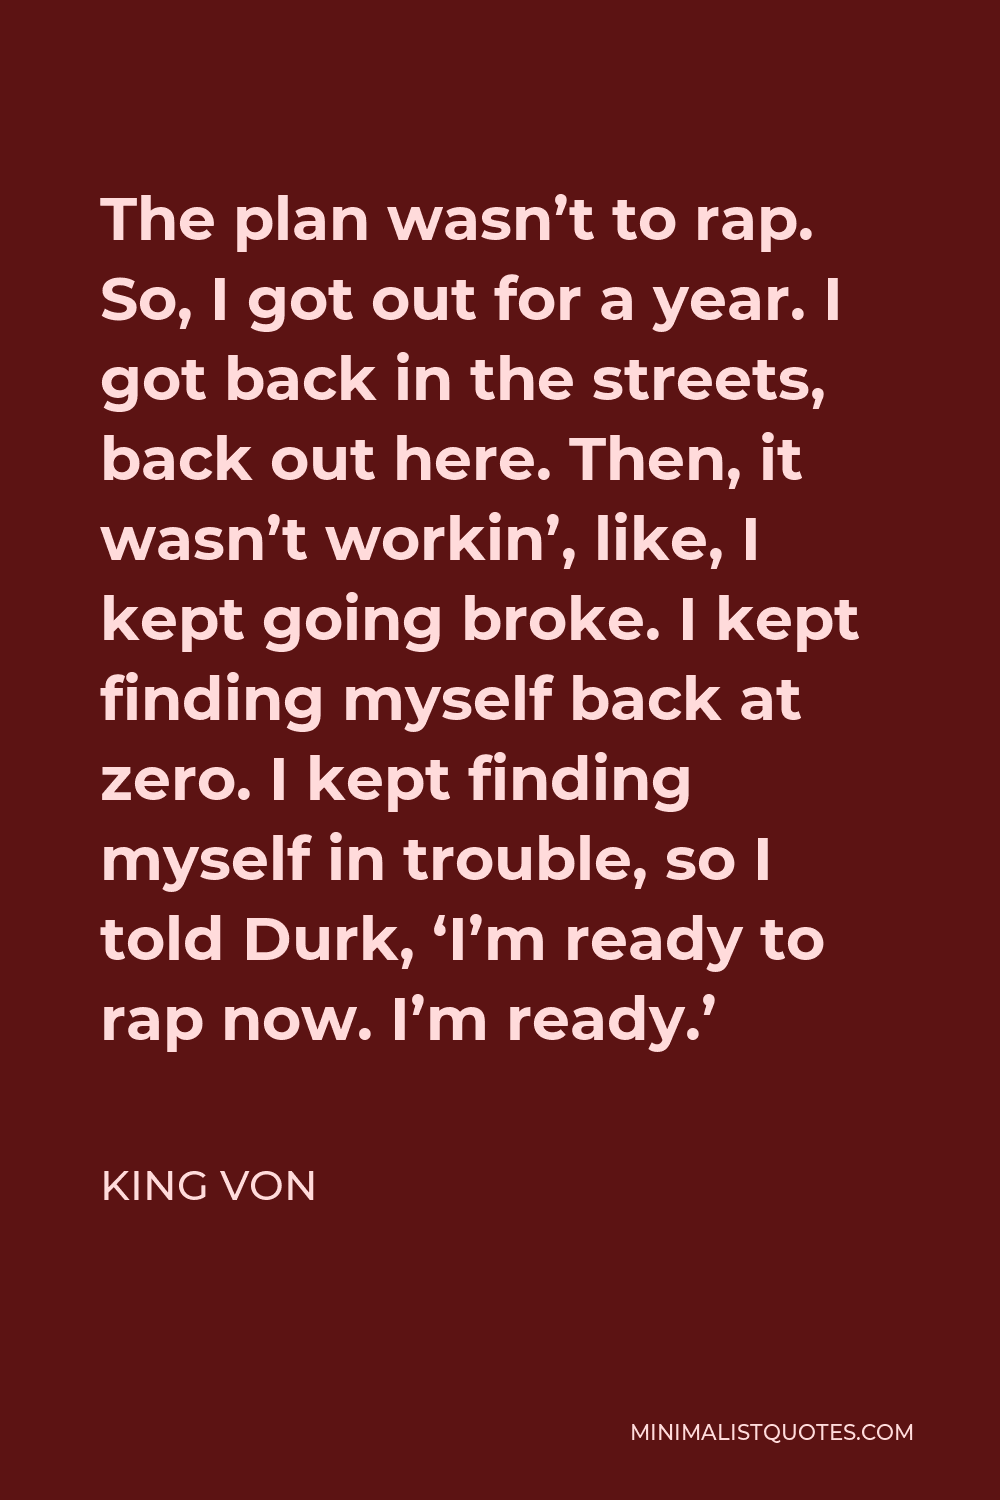 King Von Quote - The plan wasn’t to rap. So, I got out for a year. I got back in the streets, back out here. Then, it wasn’t workin’, like, I kept going broke. I kept finding myself back at zero. I kept finding myself in trouble, so I told Durk, ‘I’m ready to rap now. I’m ready.’